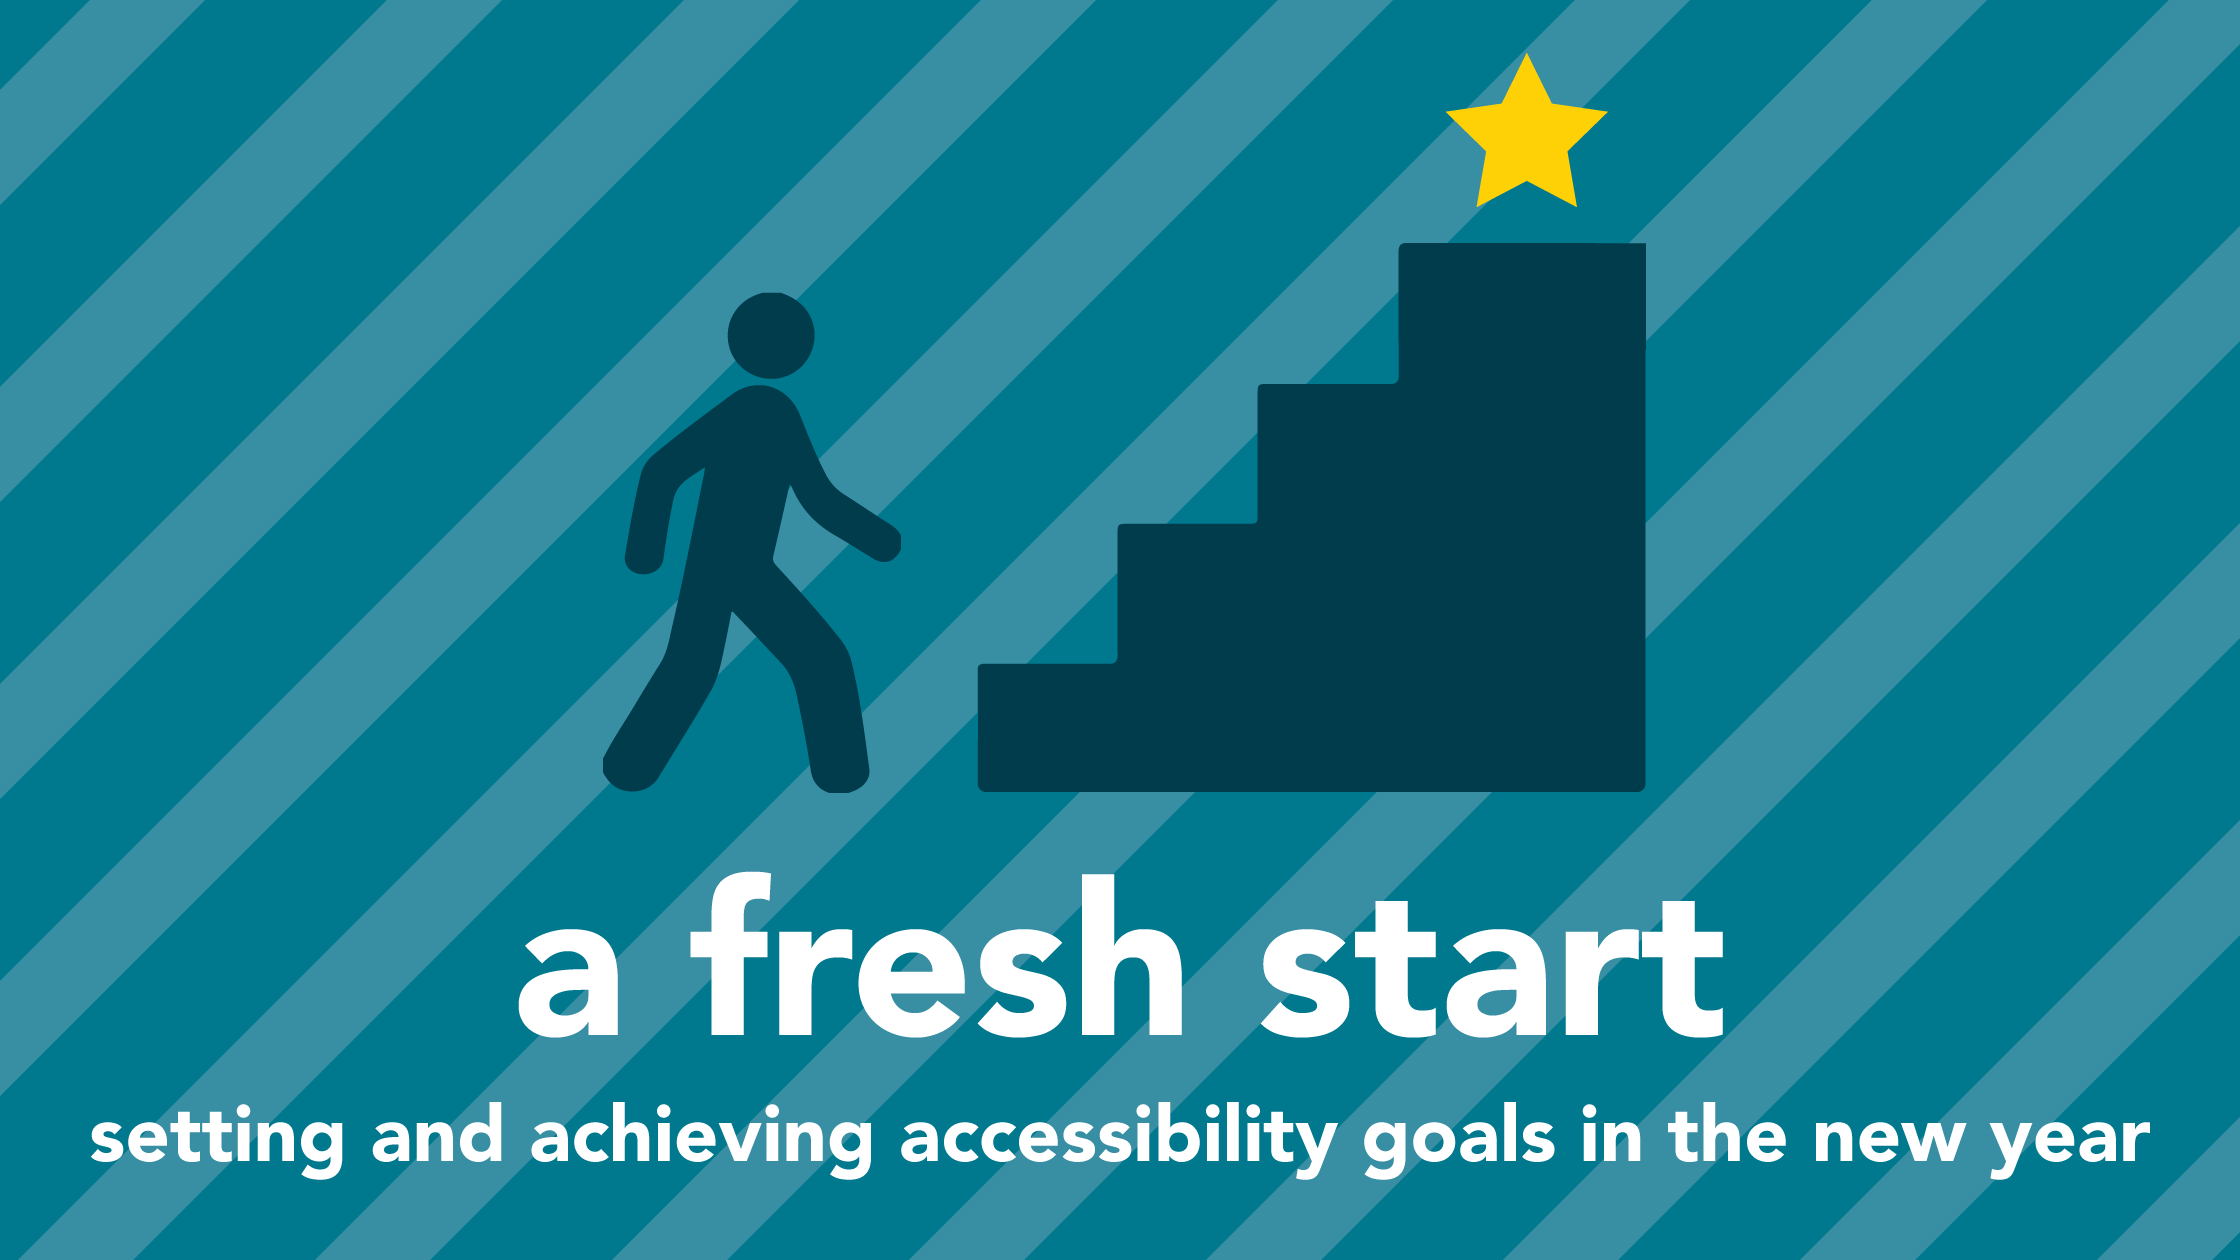 A Fresh Start, Setting and Achieveing Accessiblity Goals in the New Year